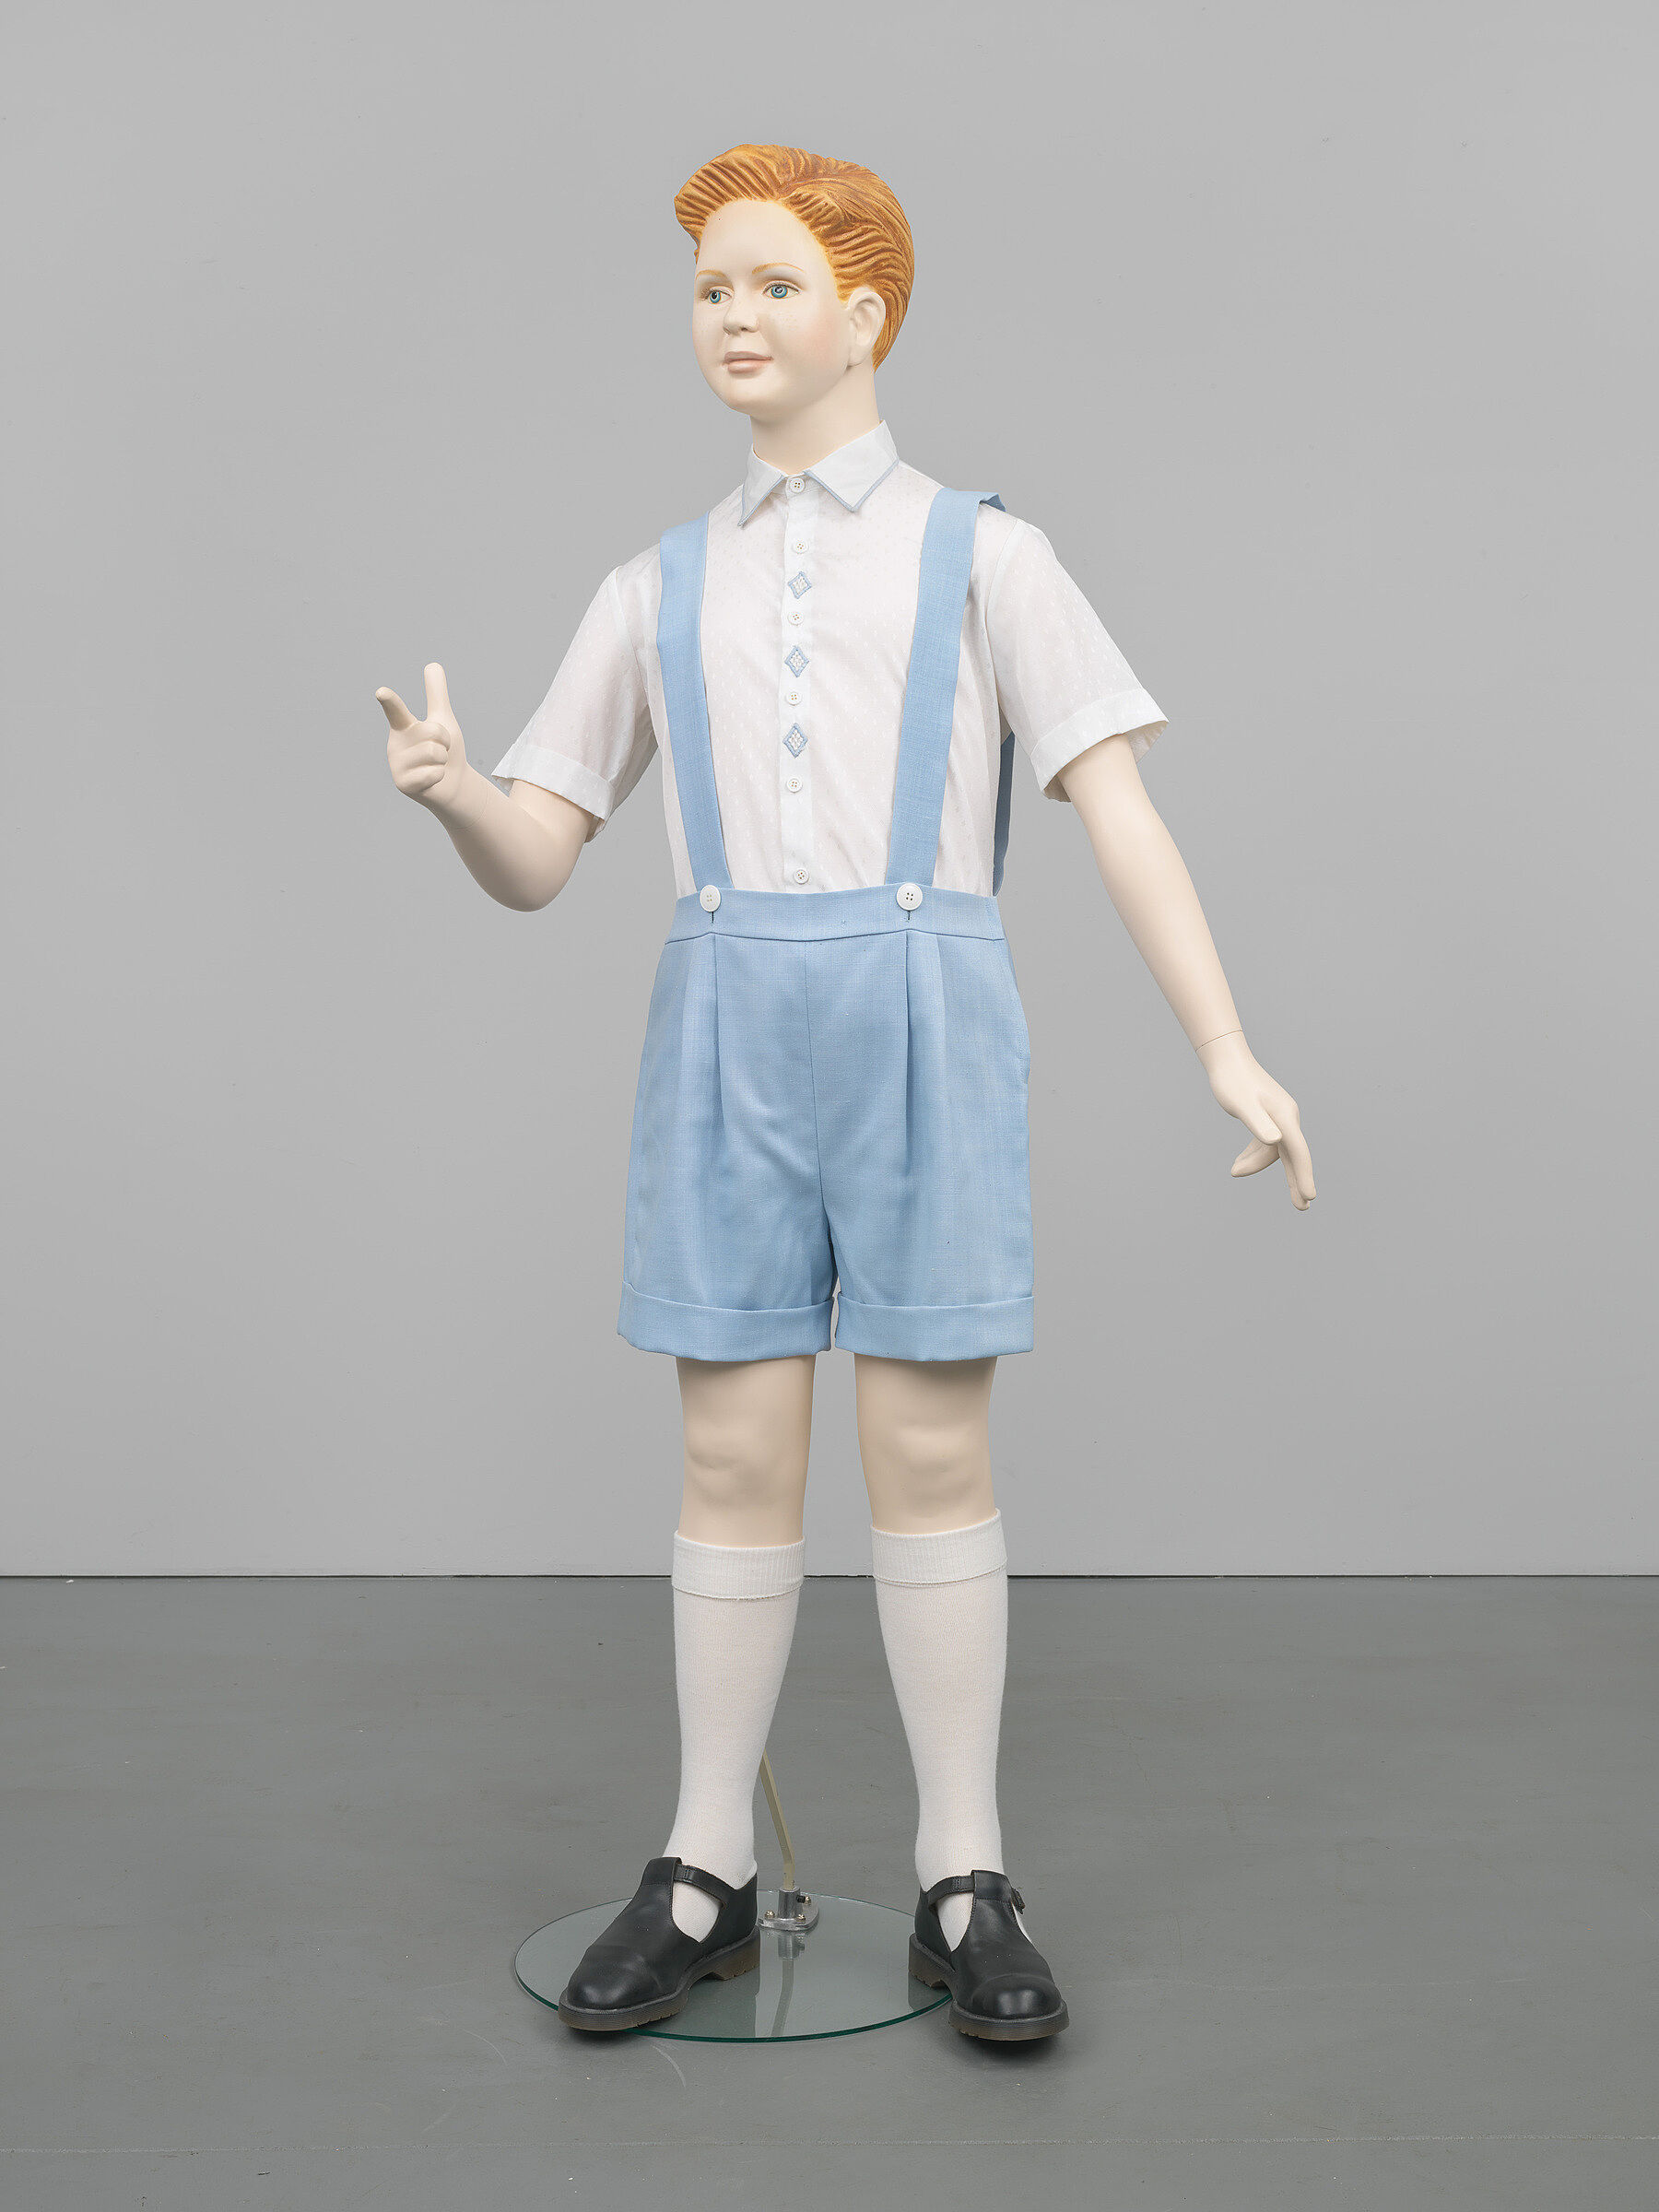 A sculpture of a boy wearing a white shirt and overalls.